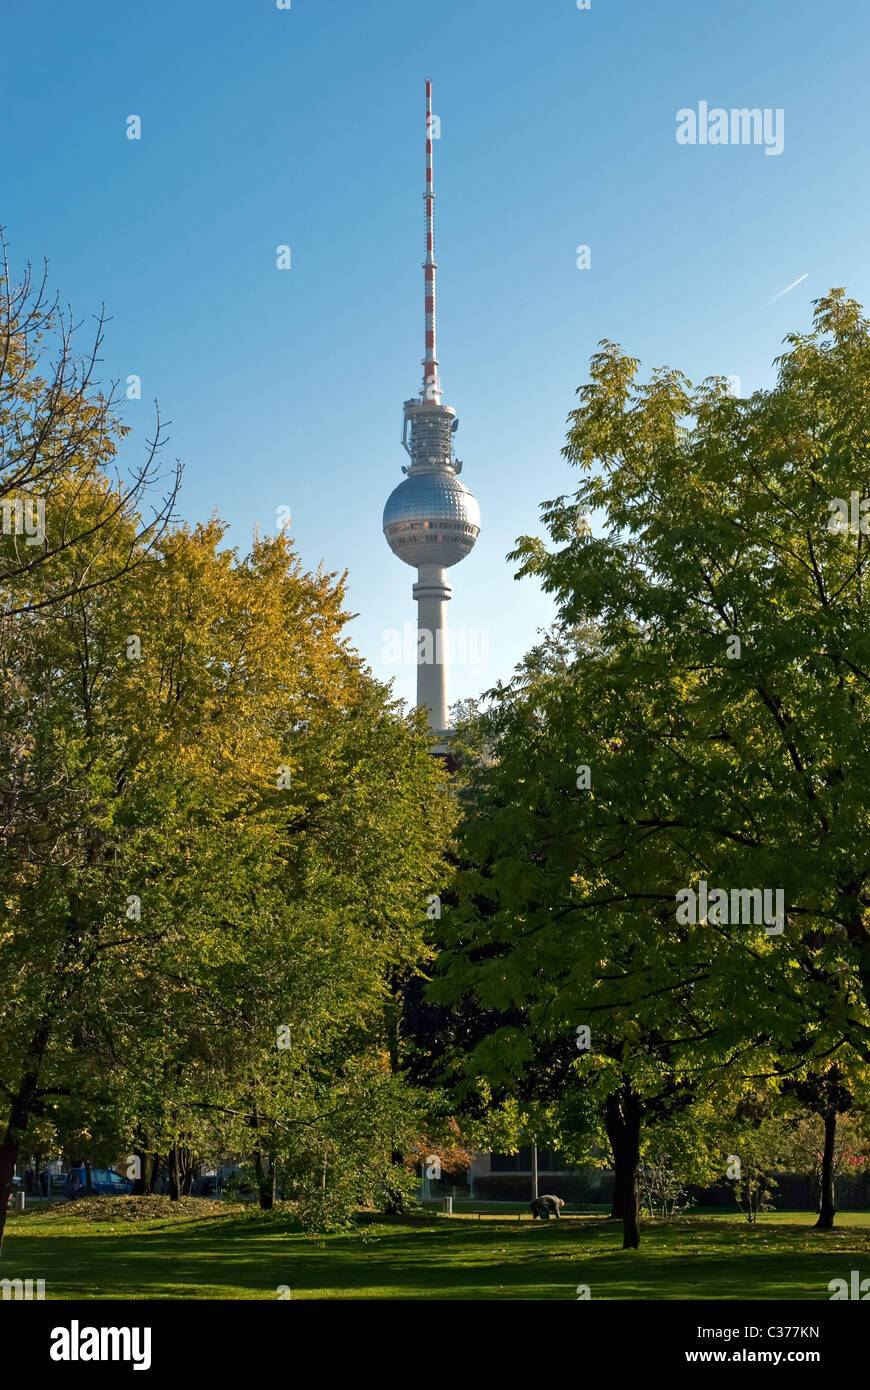 the Berlin television tower stands between green trees Stock Photo